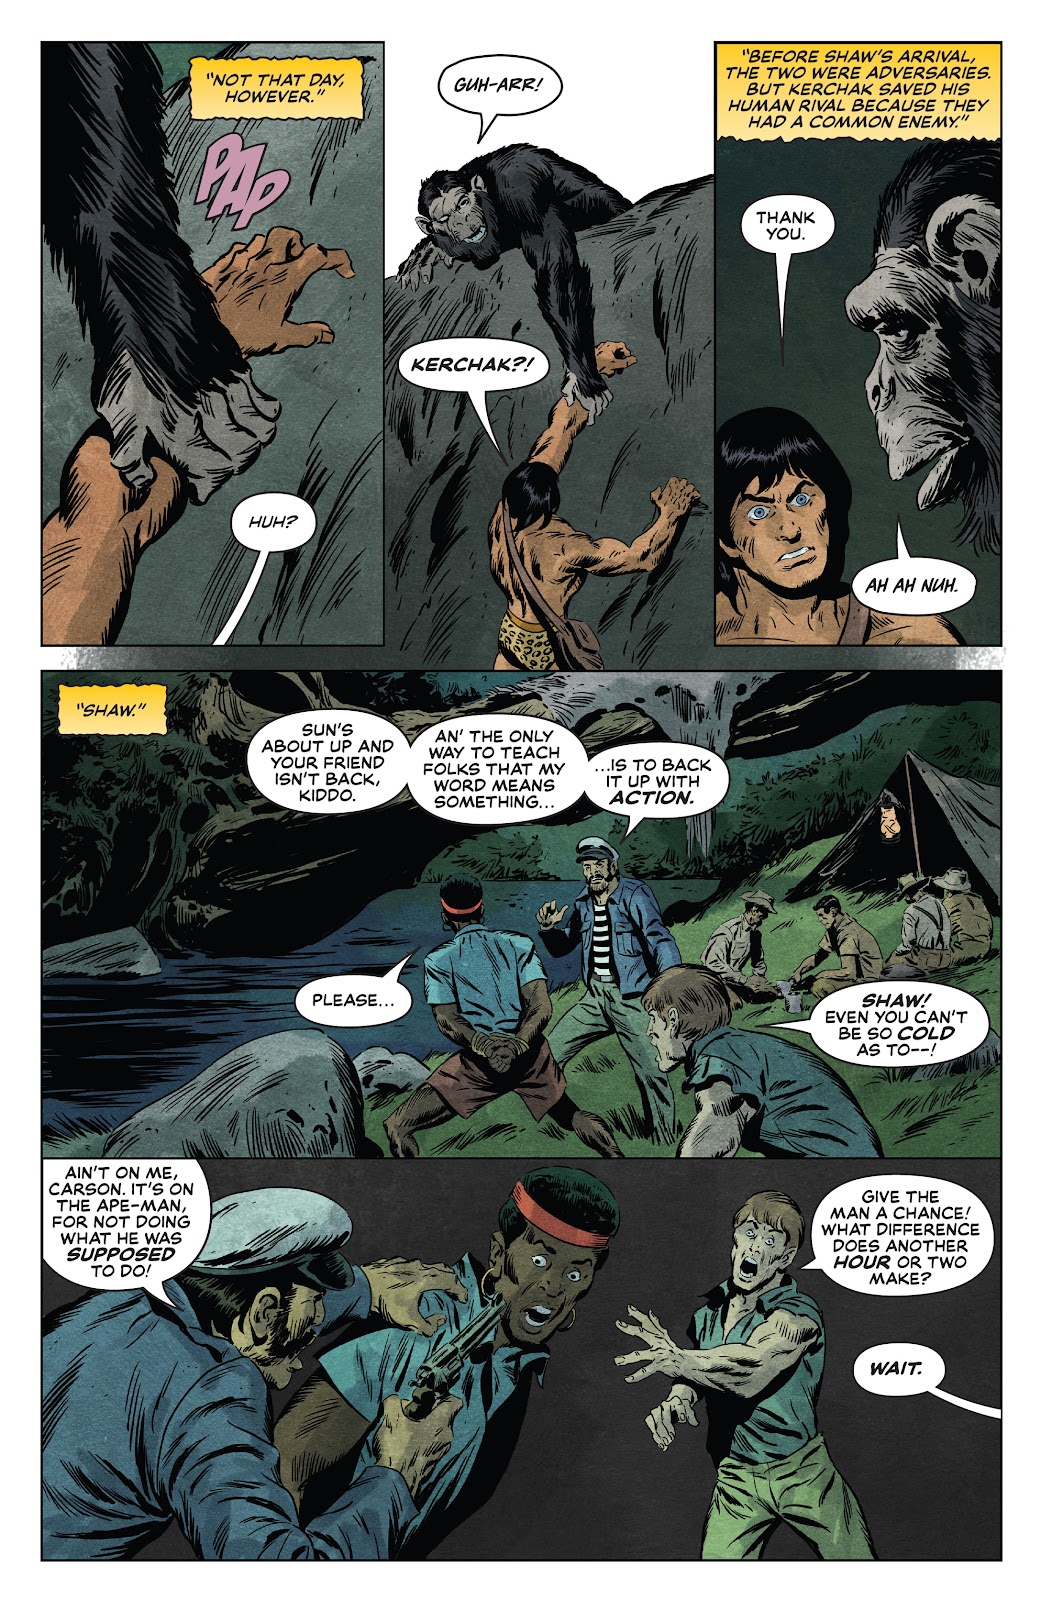 Lord of the Jungle (2022) issue 5 - Page 21